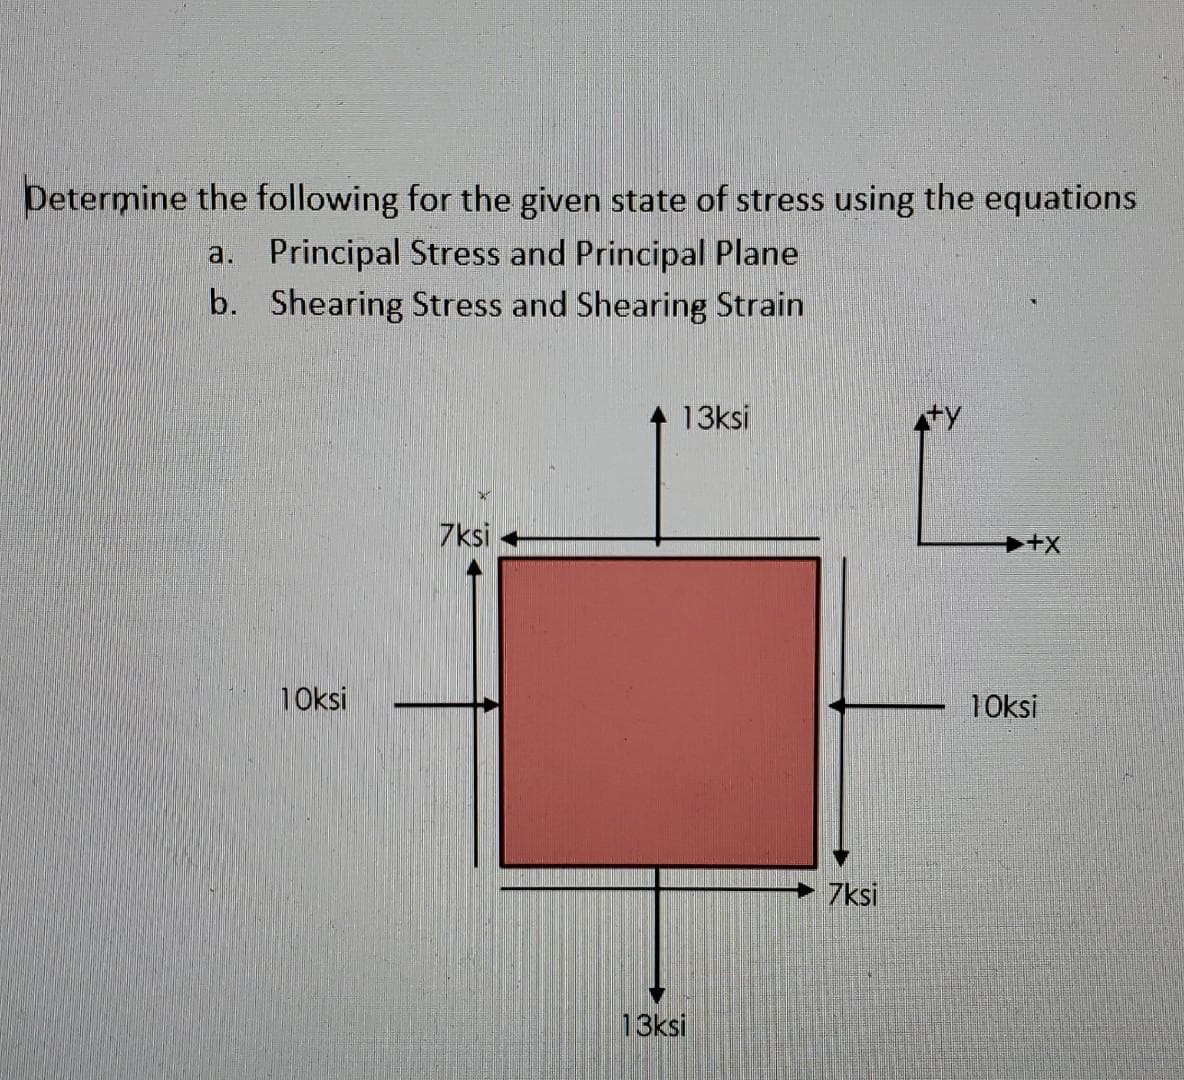 Determine the following for the given state of stress using the equations
a. Principal Stress and Principal Plane
b. Shearing Stress and Shearing Strain
13ksi
7ksi
10ksi
10ksi
7ksi
13ksi
